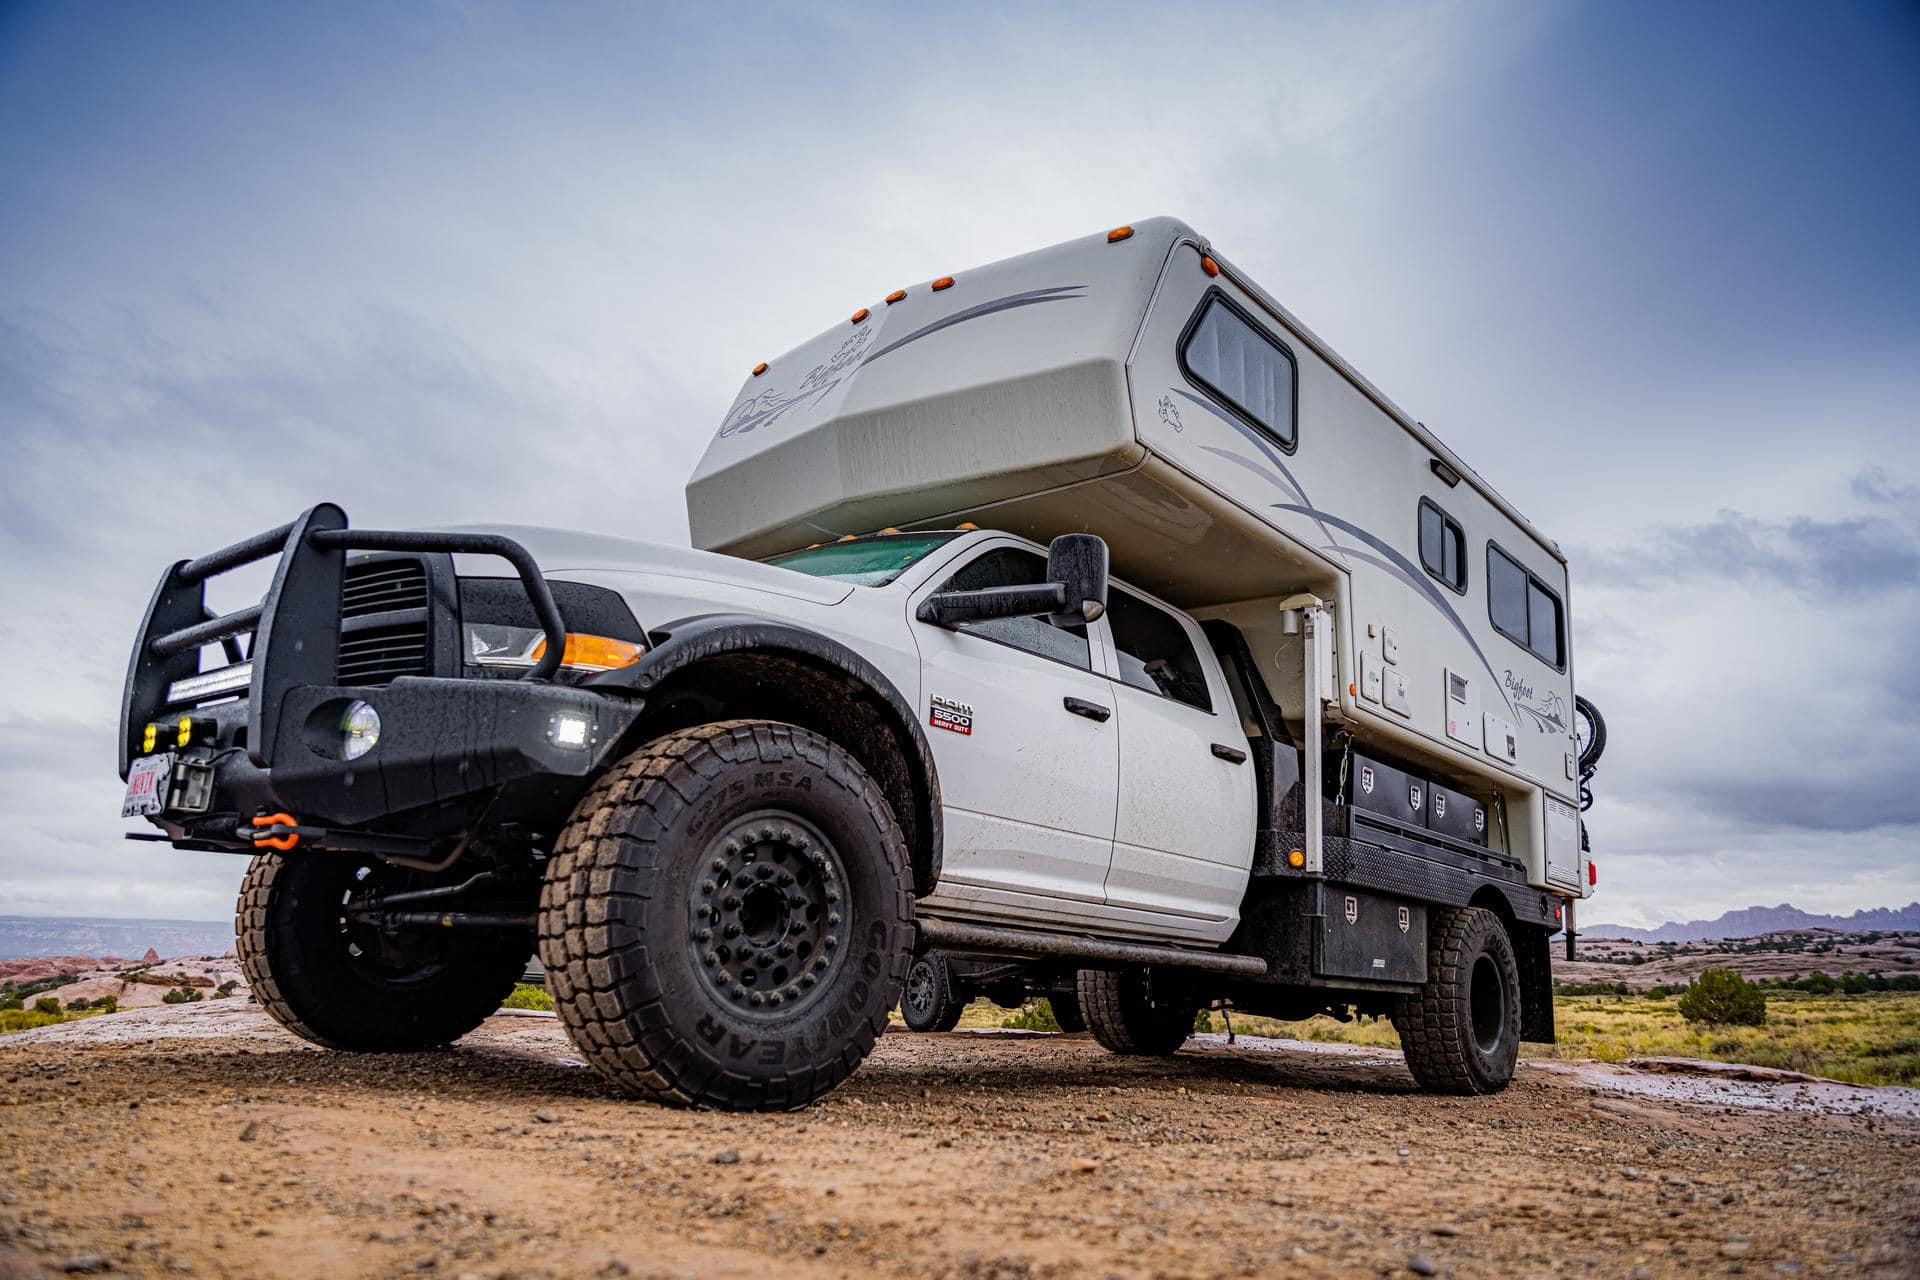 5 Walk-Through Tours of Awesome Overland Vehicles